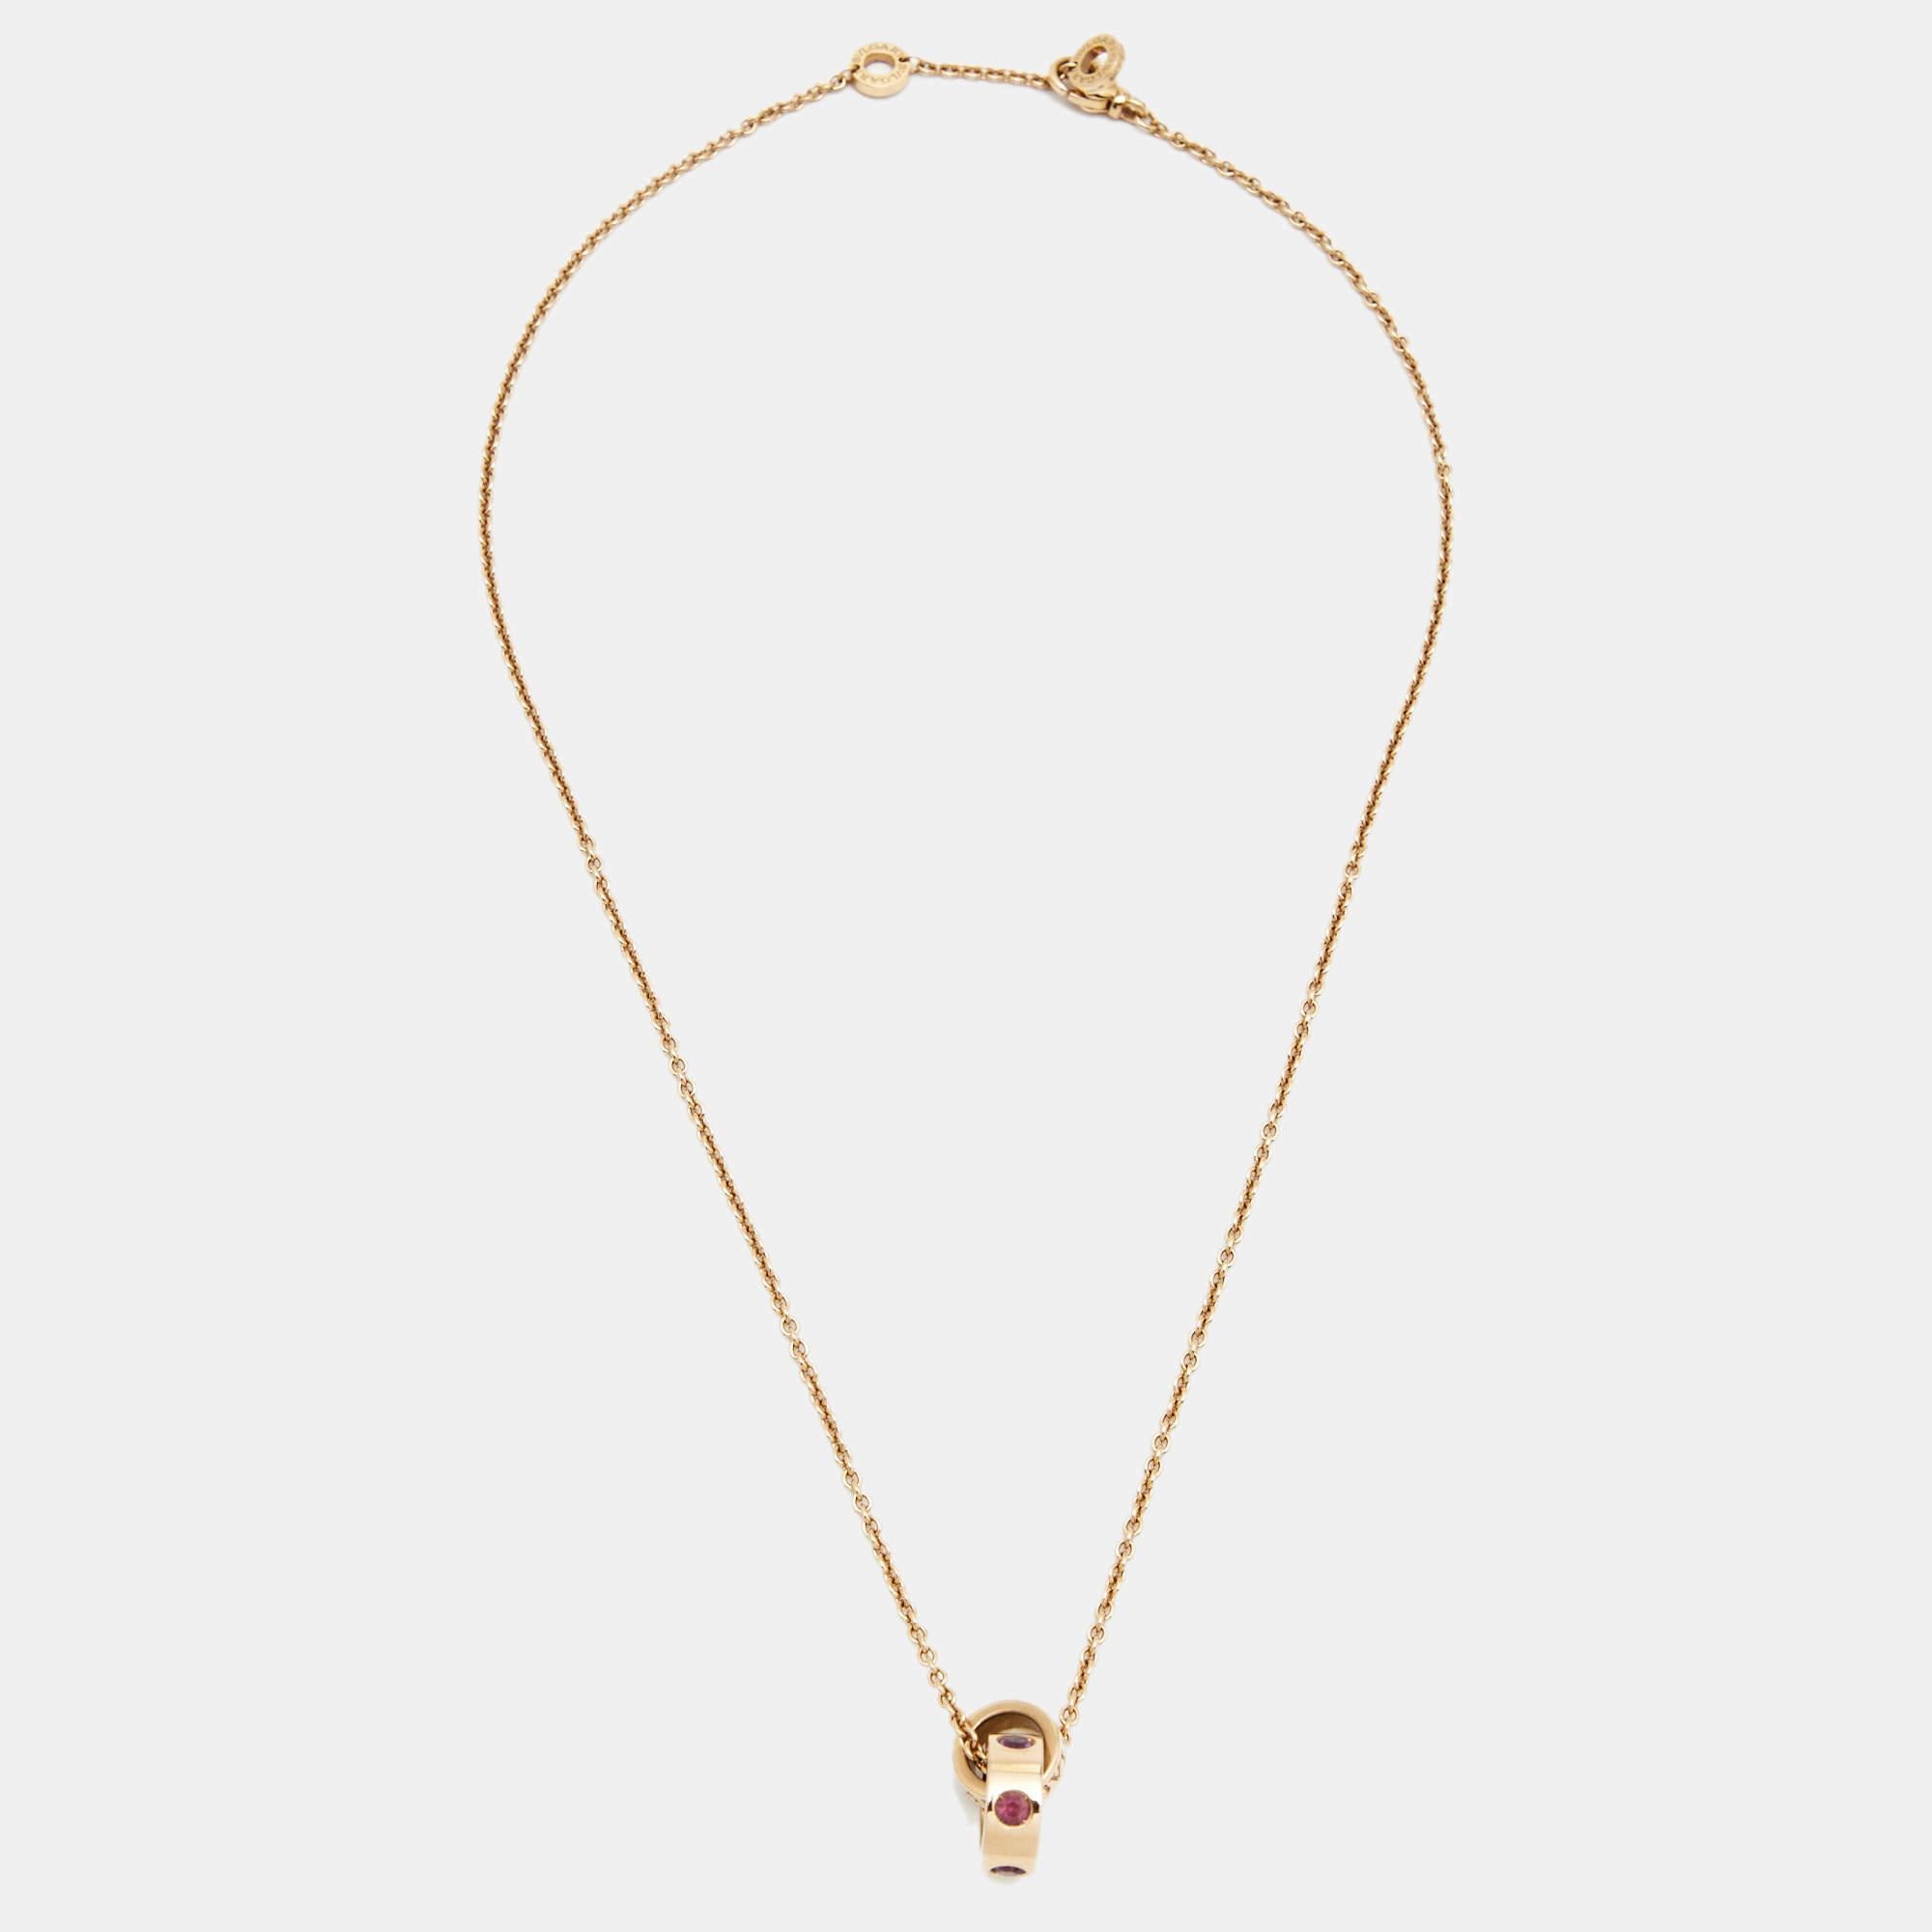 This designer Bvlgari Roman Sorbets necklace imparts elegance through its distinctive design. It speaks of impeccable style and ultimate luxury. Flaunt your discerning fashion taste by buying this beauty today!

